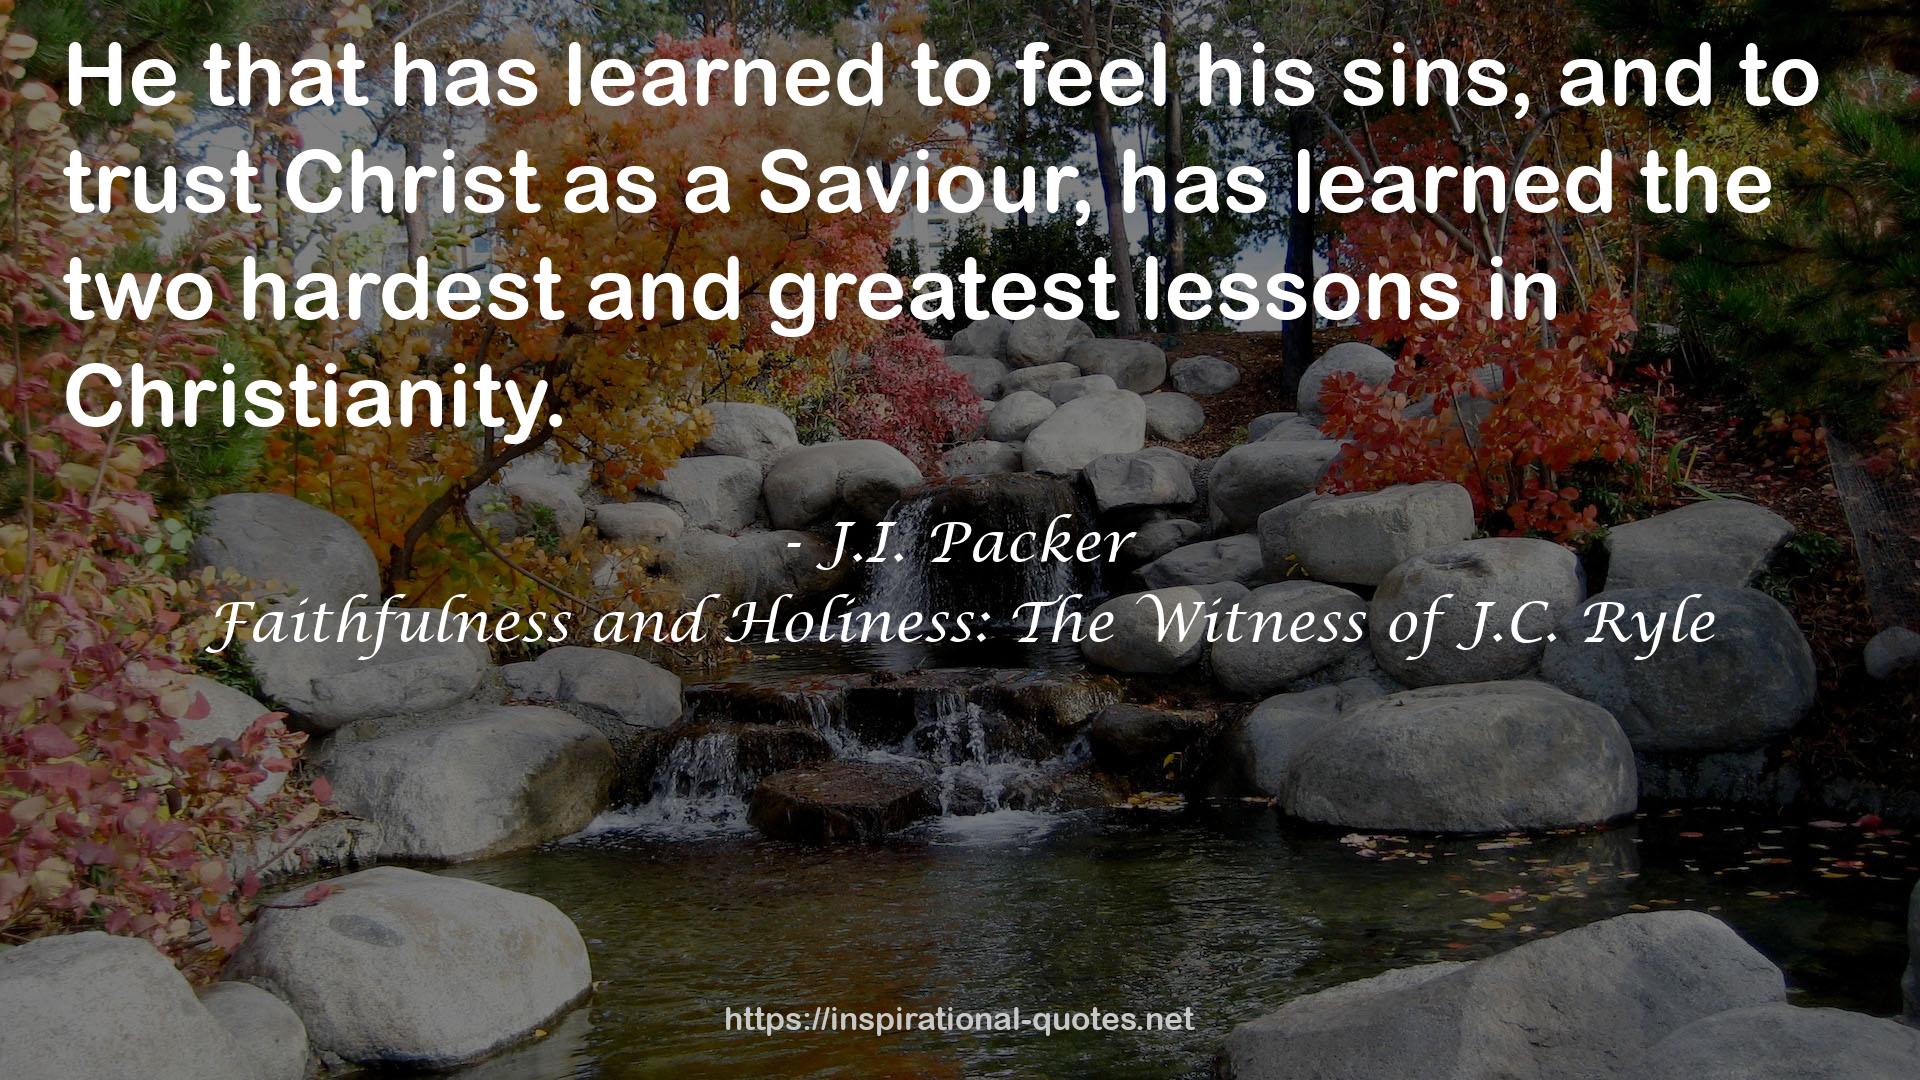 Faithfulness and Holiness: The Witness of J.C. Ryle QUOTES